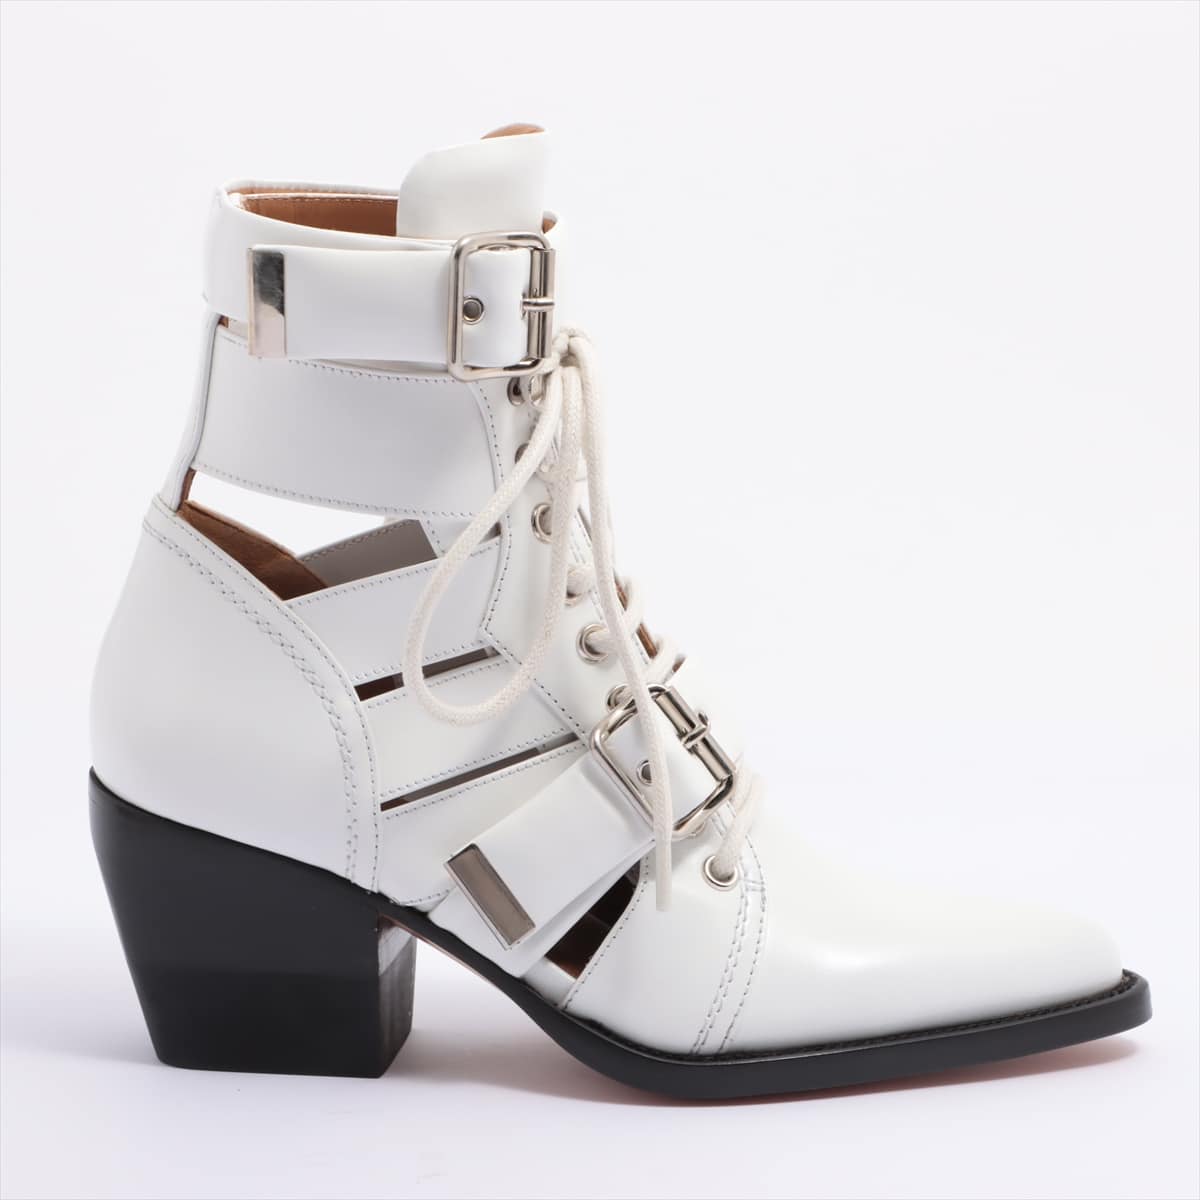 Chloe RYLEE Leather Boots 36 Ladies' White